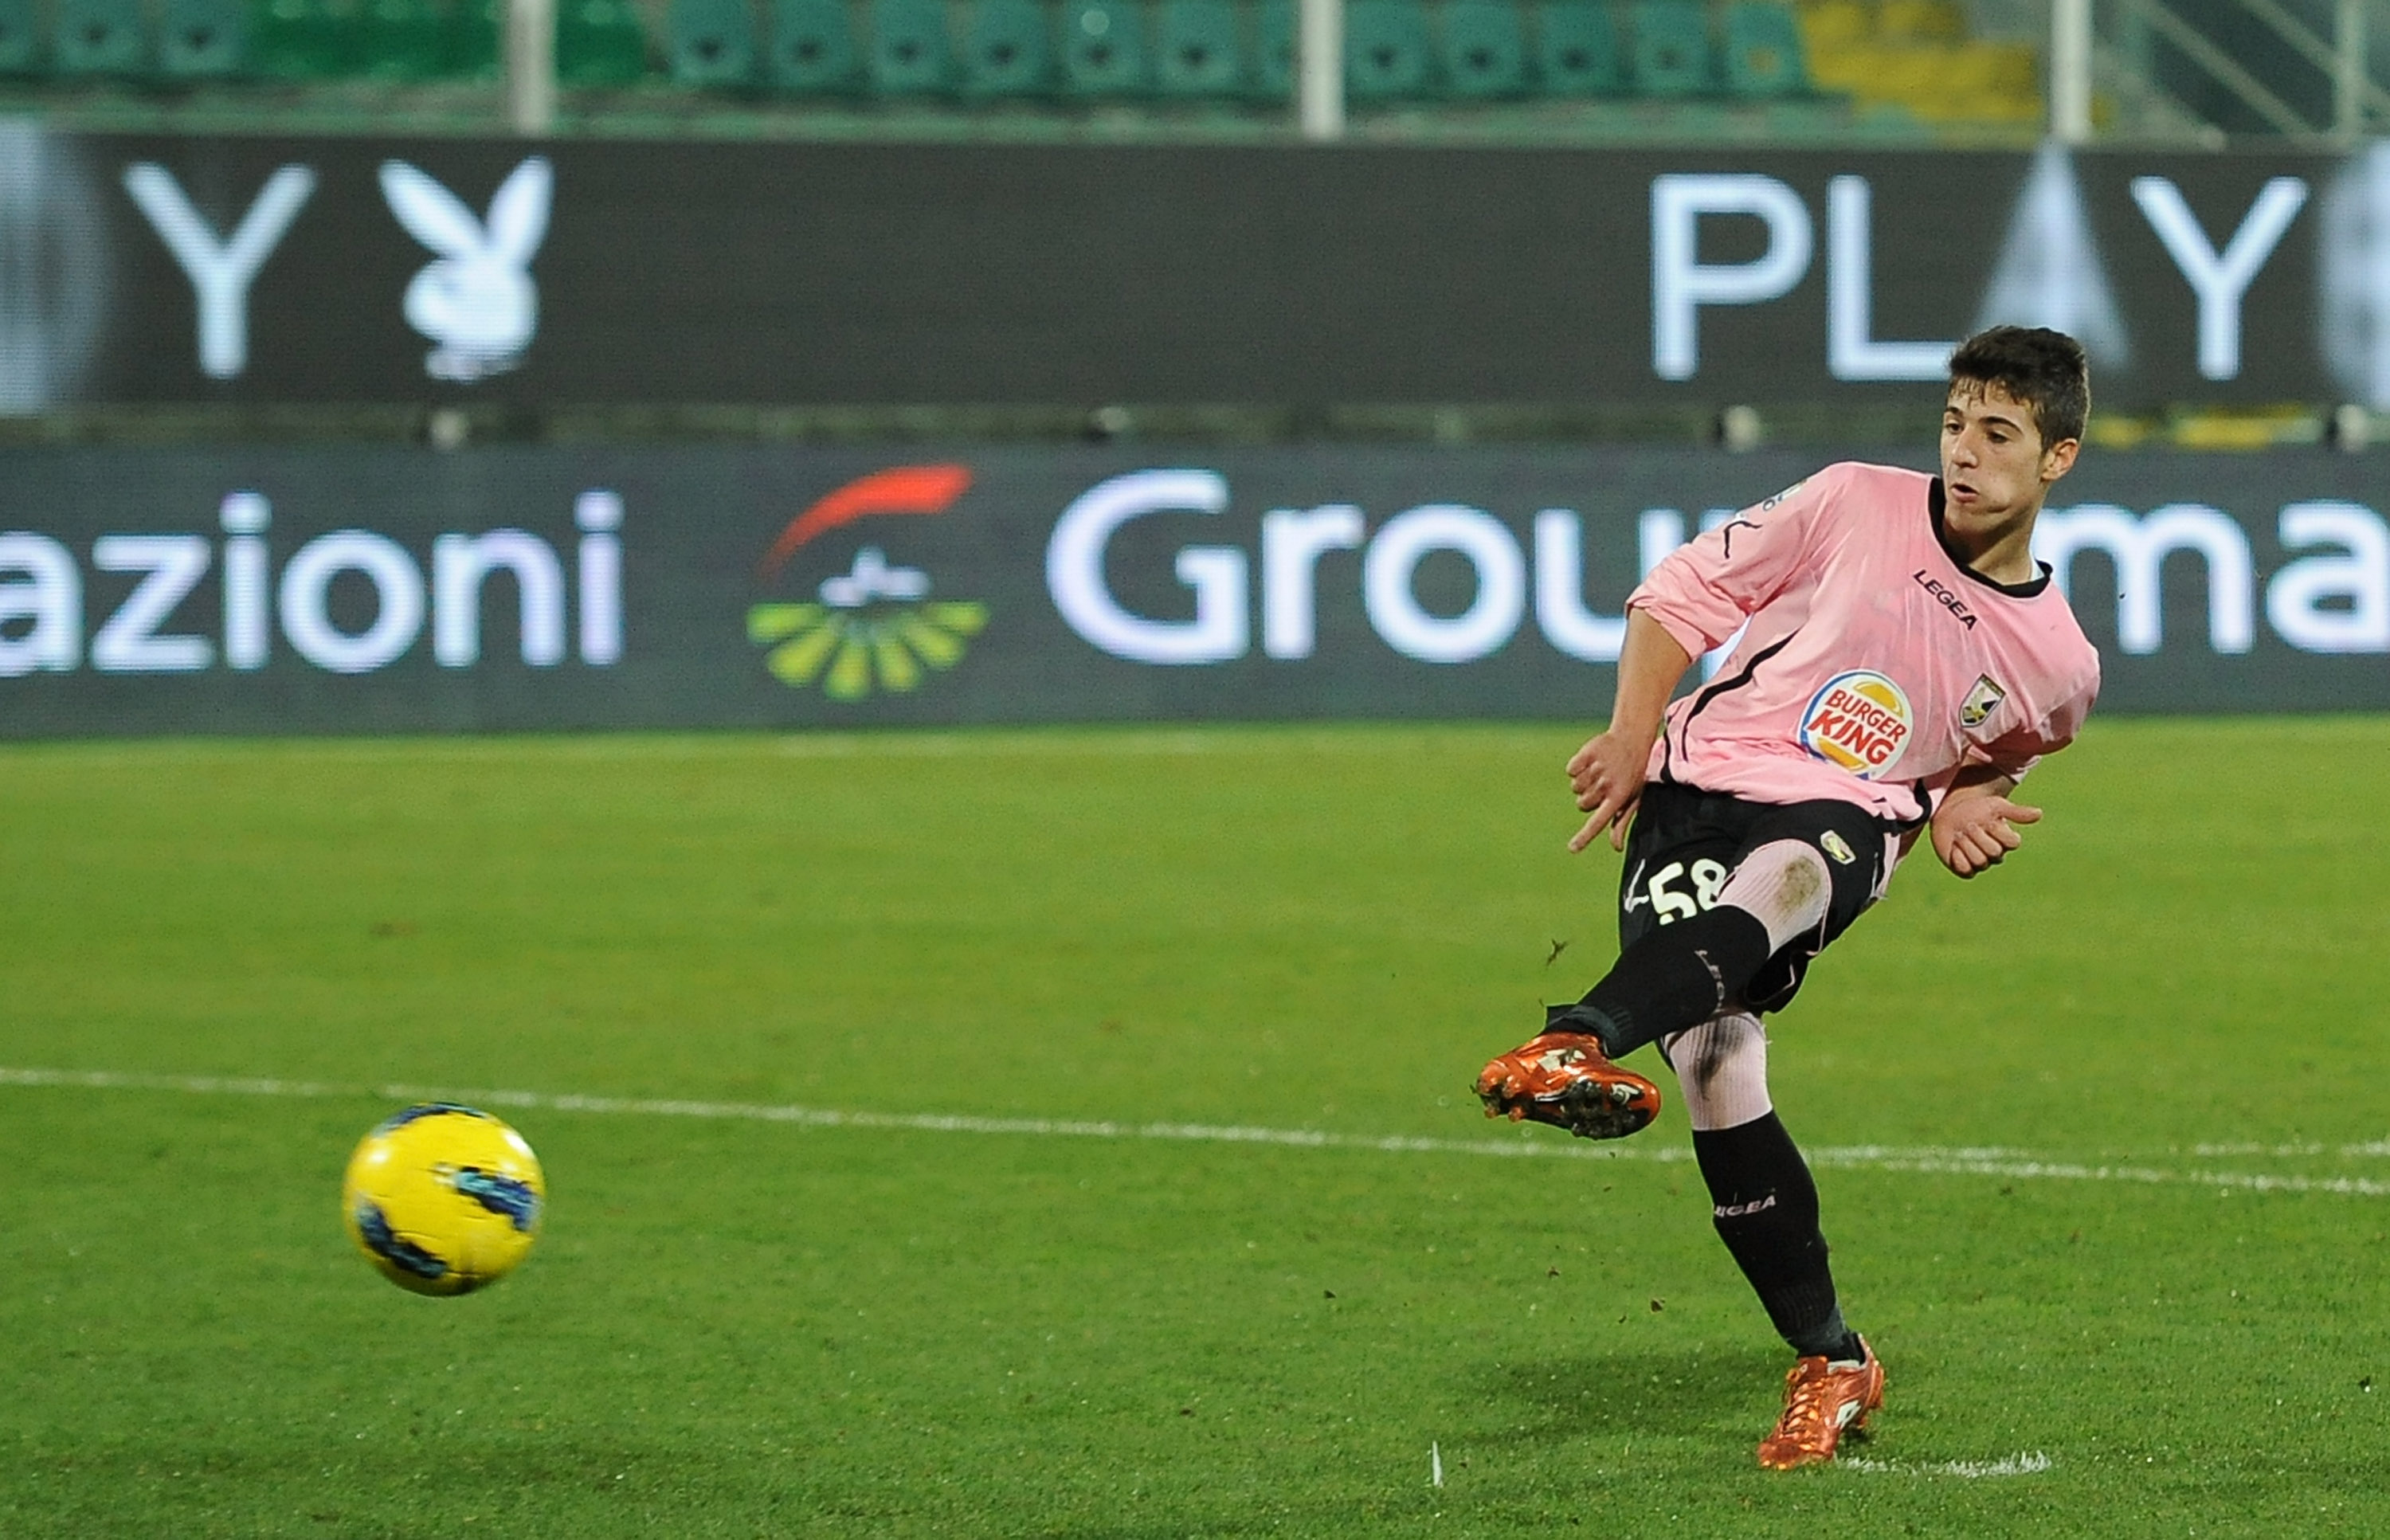 PALERMO, ITALY - DECEMBER 13:  Mauro Bollino of Palermo misses a penalty during the Tim Cup match between US Citta di Palermo and AC Siena at Stadio Renzo Barbera on December 13, 2011 in Palermo, Italy.  (Photo by Tullio M. Puglia/Getty Images)